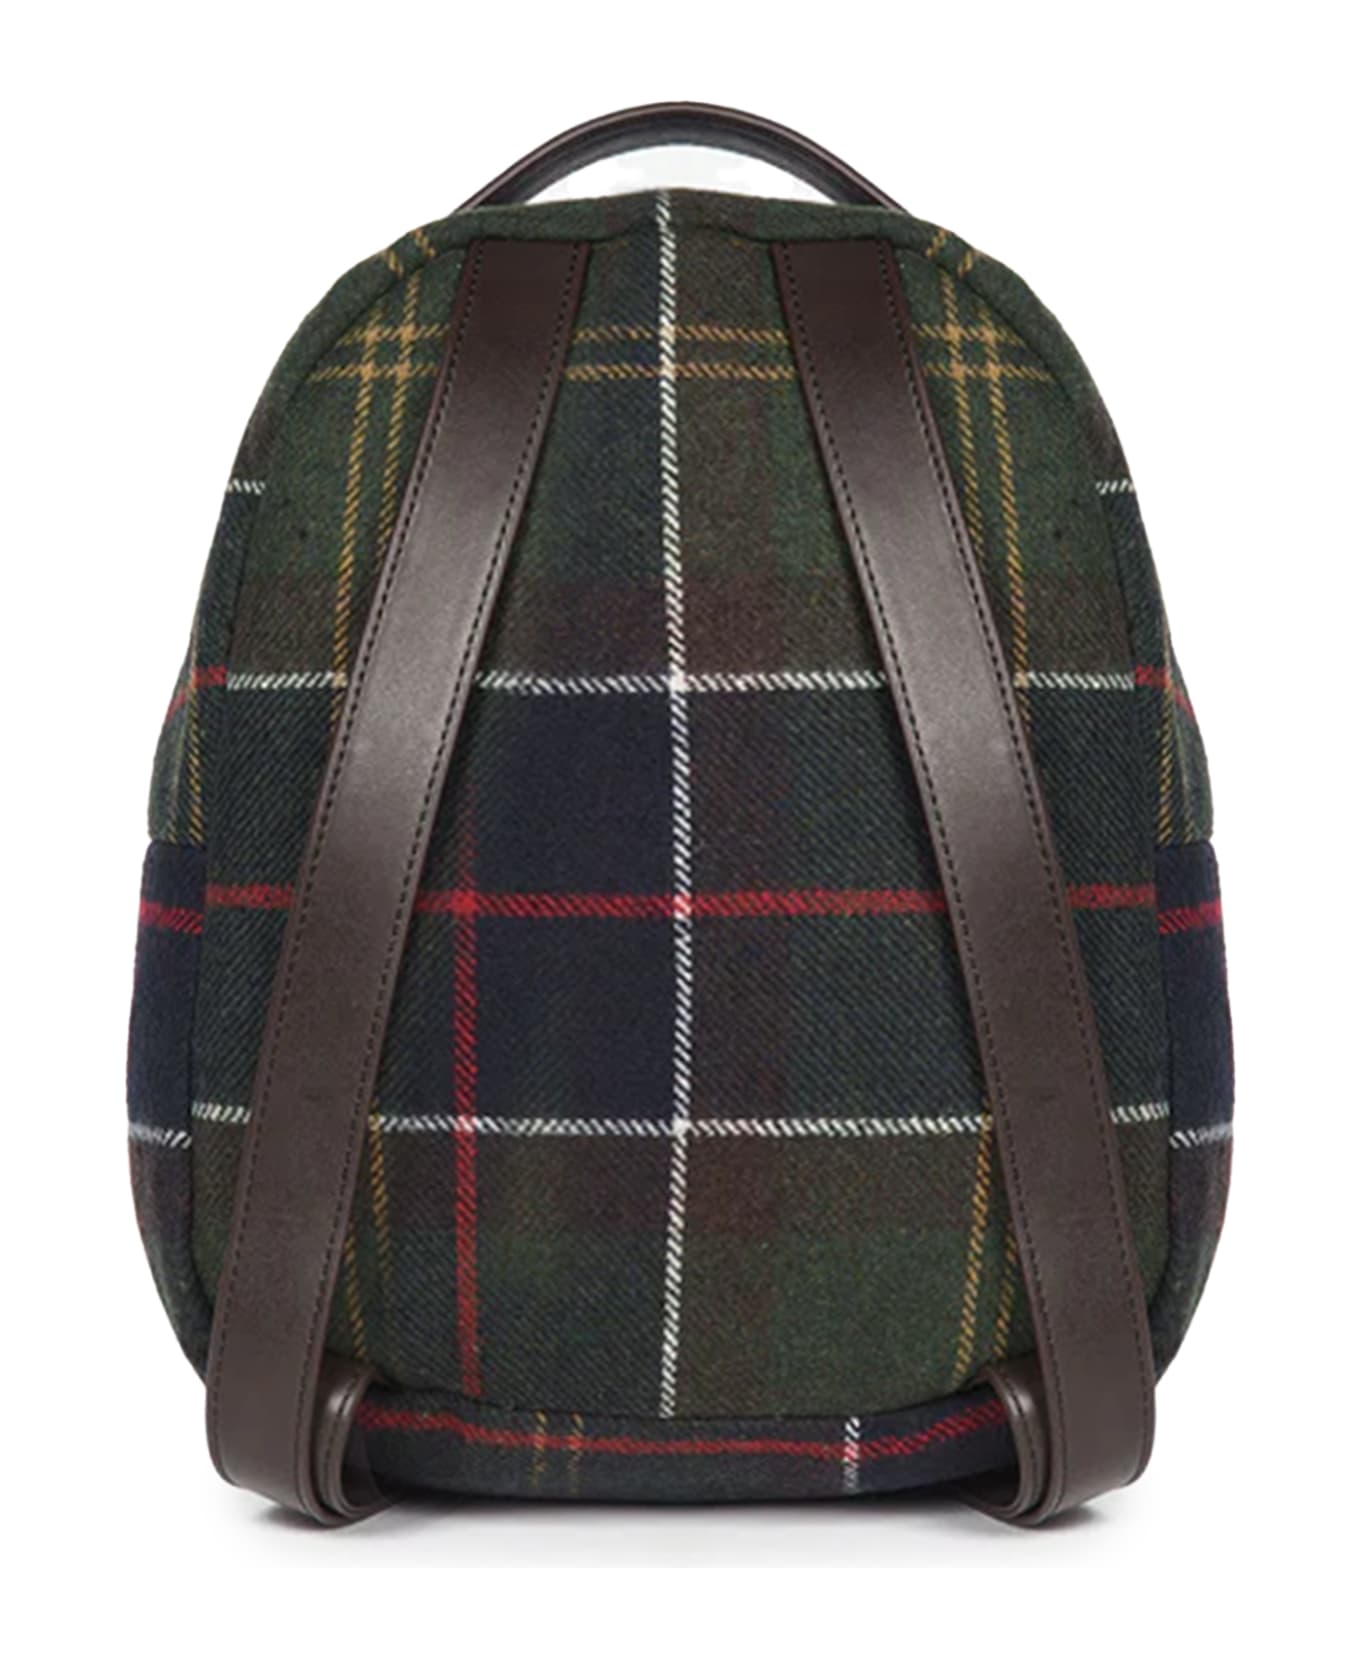 Barbour Caley Tartan Backpack - Green バックパック